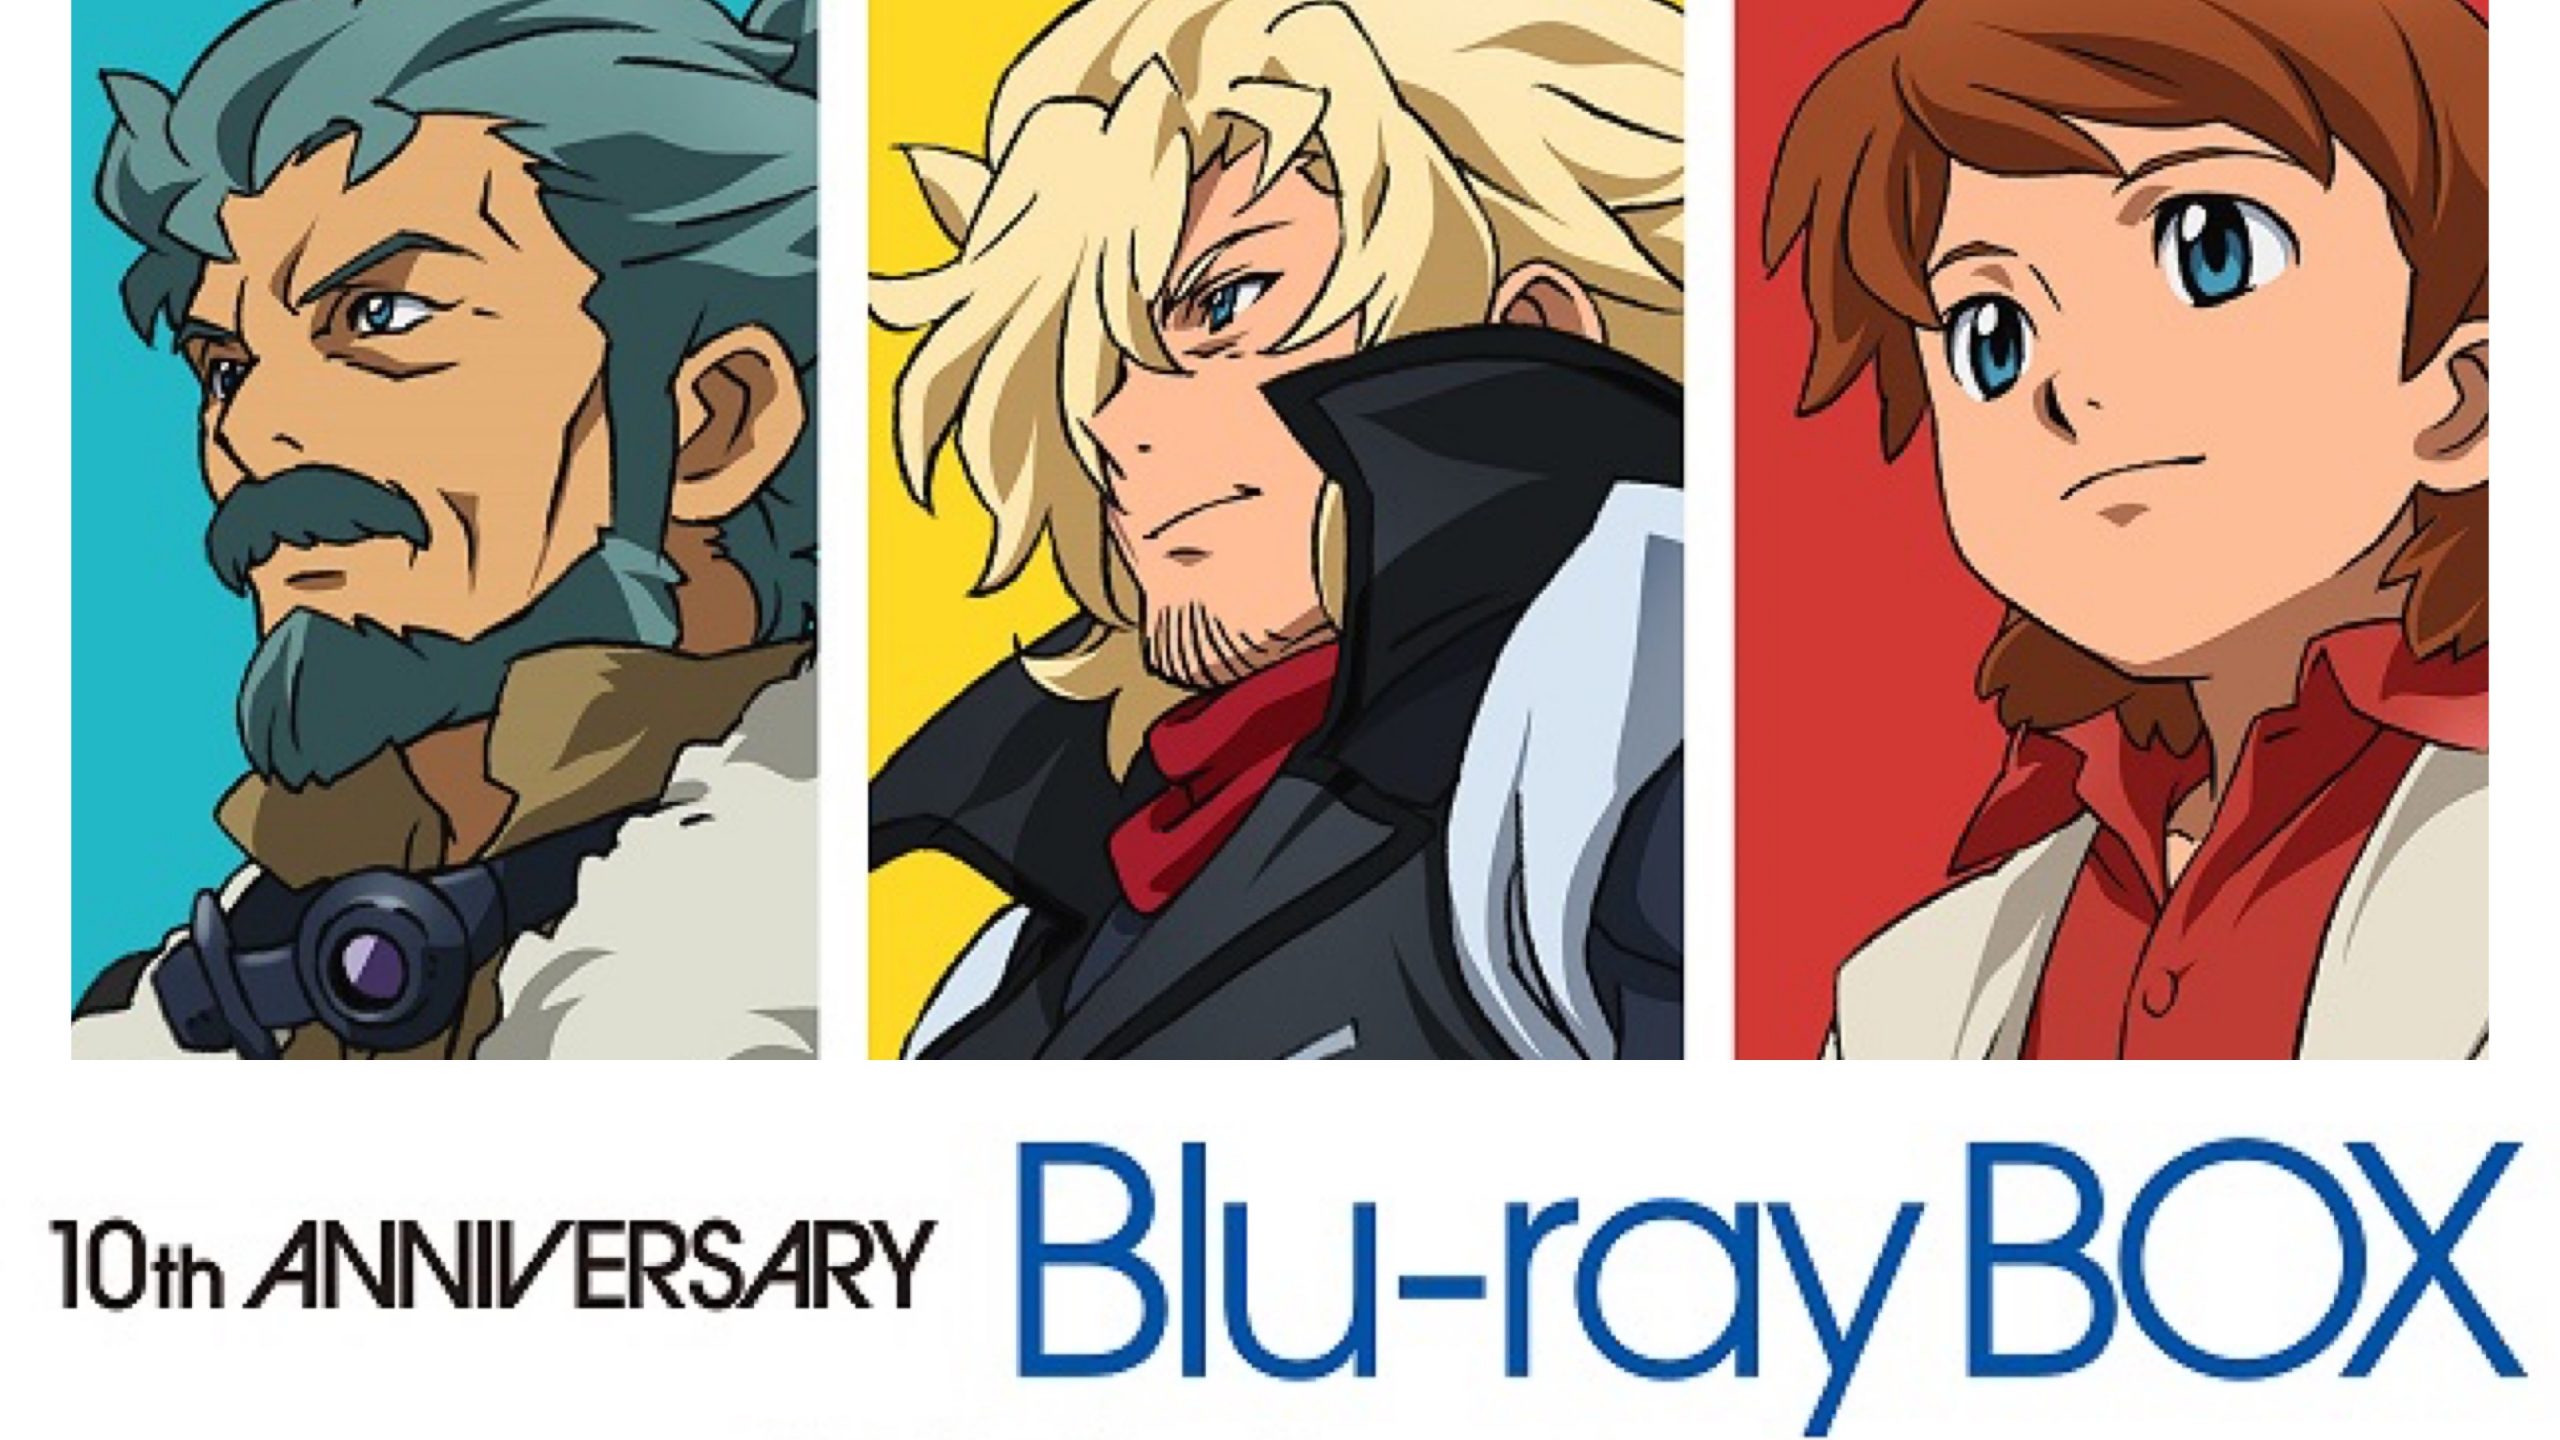 Mobile Suit Gundam Age Blu Ray Box To Be Released For 10th Anniversary Gundam News